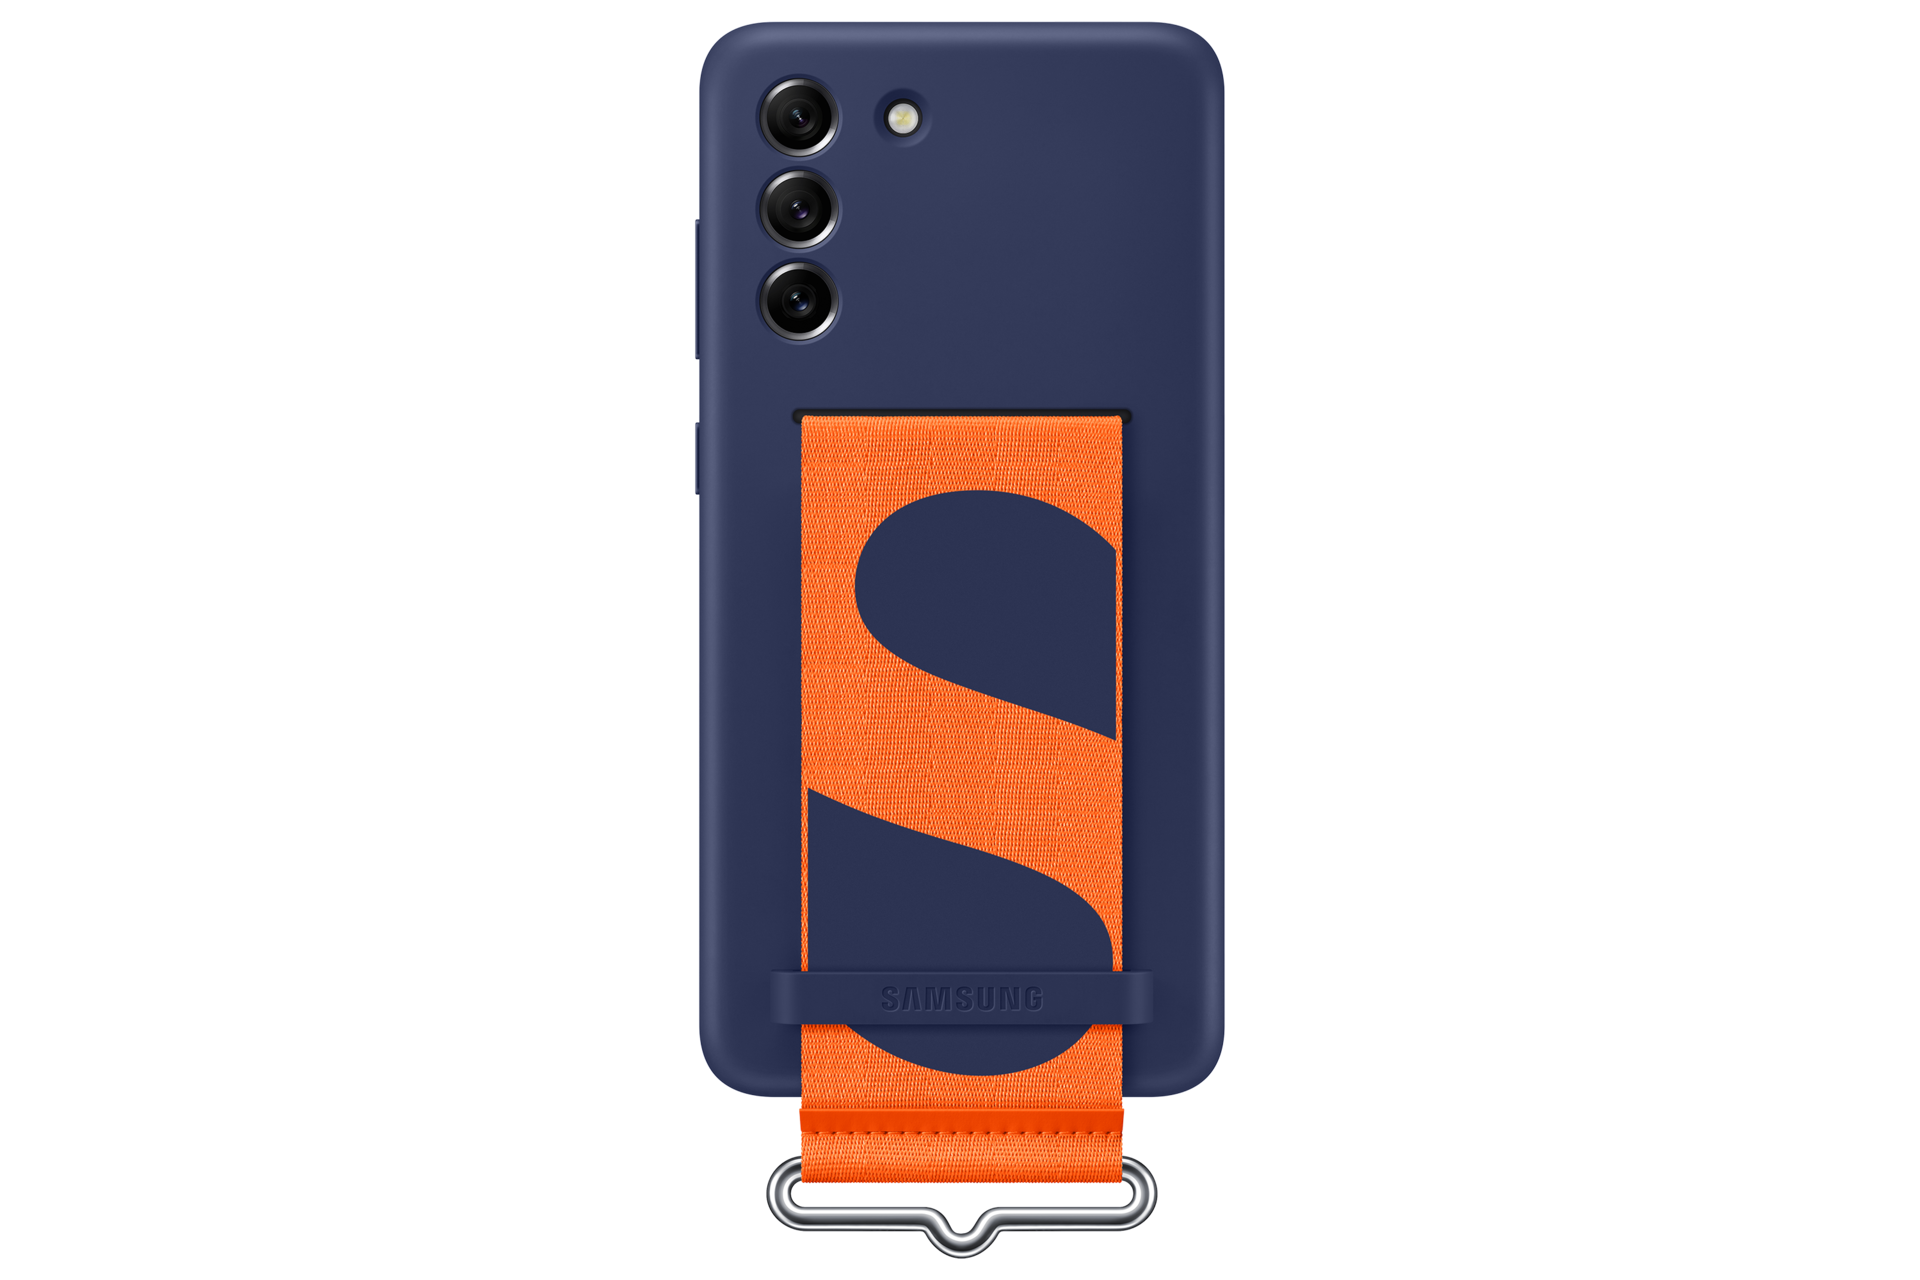 S21 FE 5G Silicone Cover with Navy Strap - Price